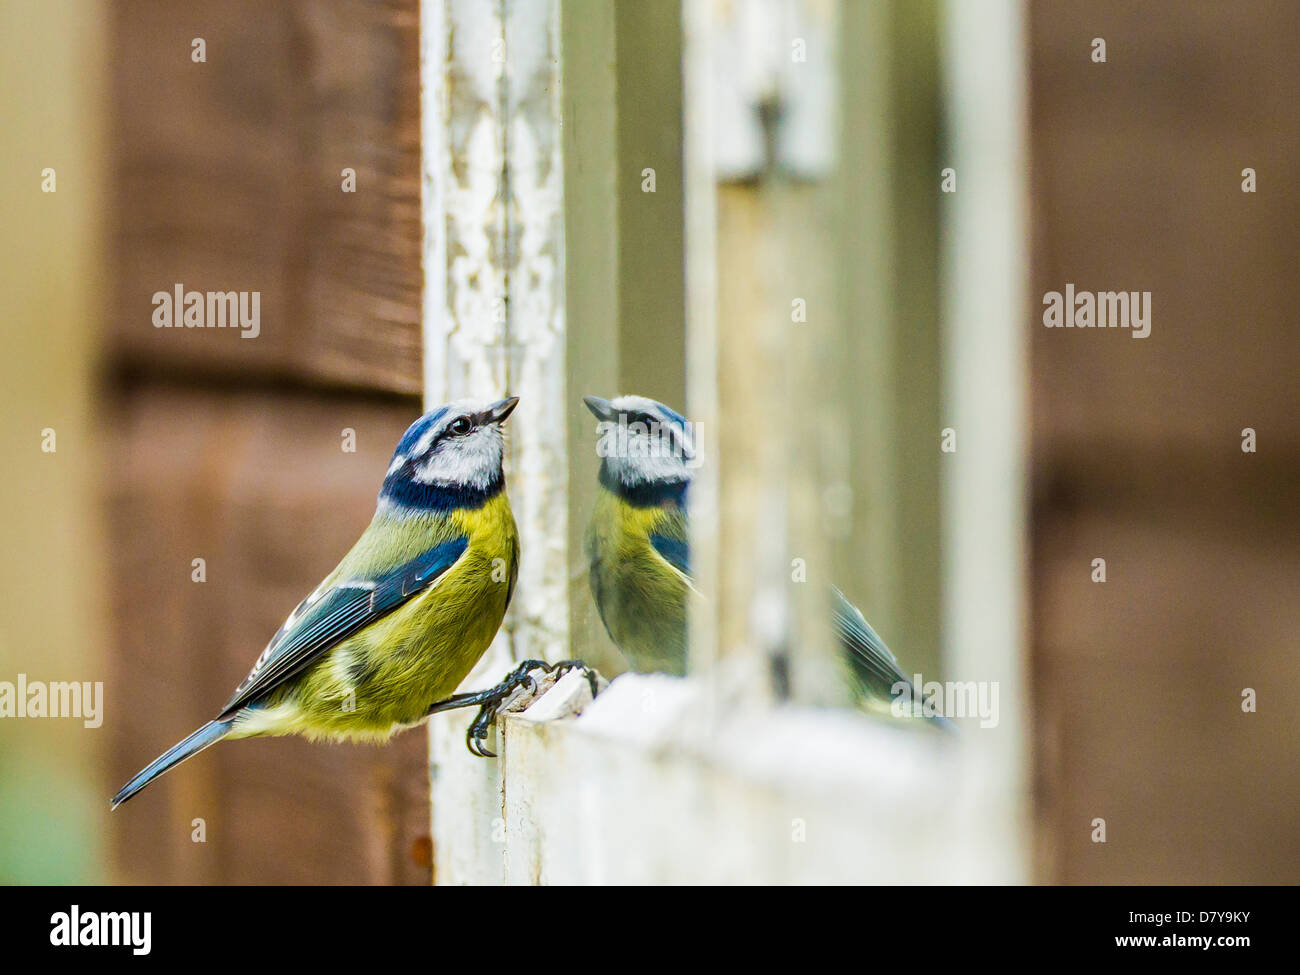 Blue Tit Reflection, Blue Tit challenging own reflection Stock Photo